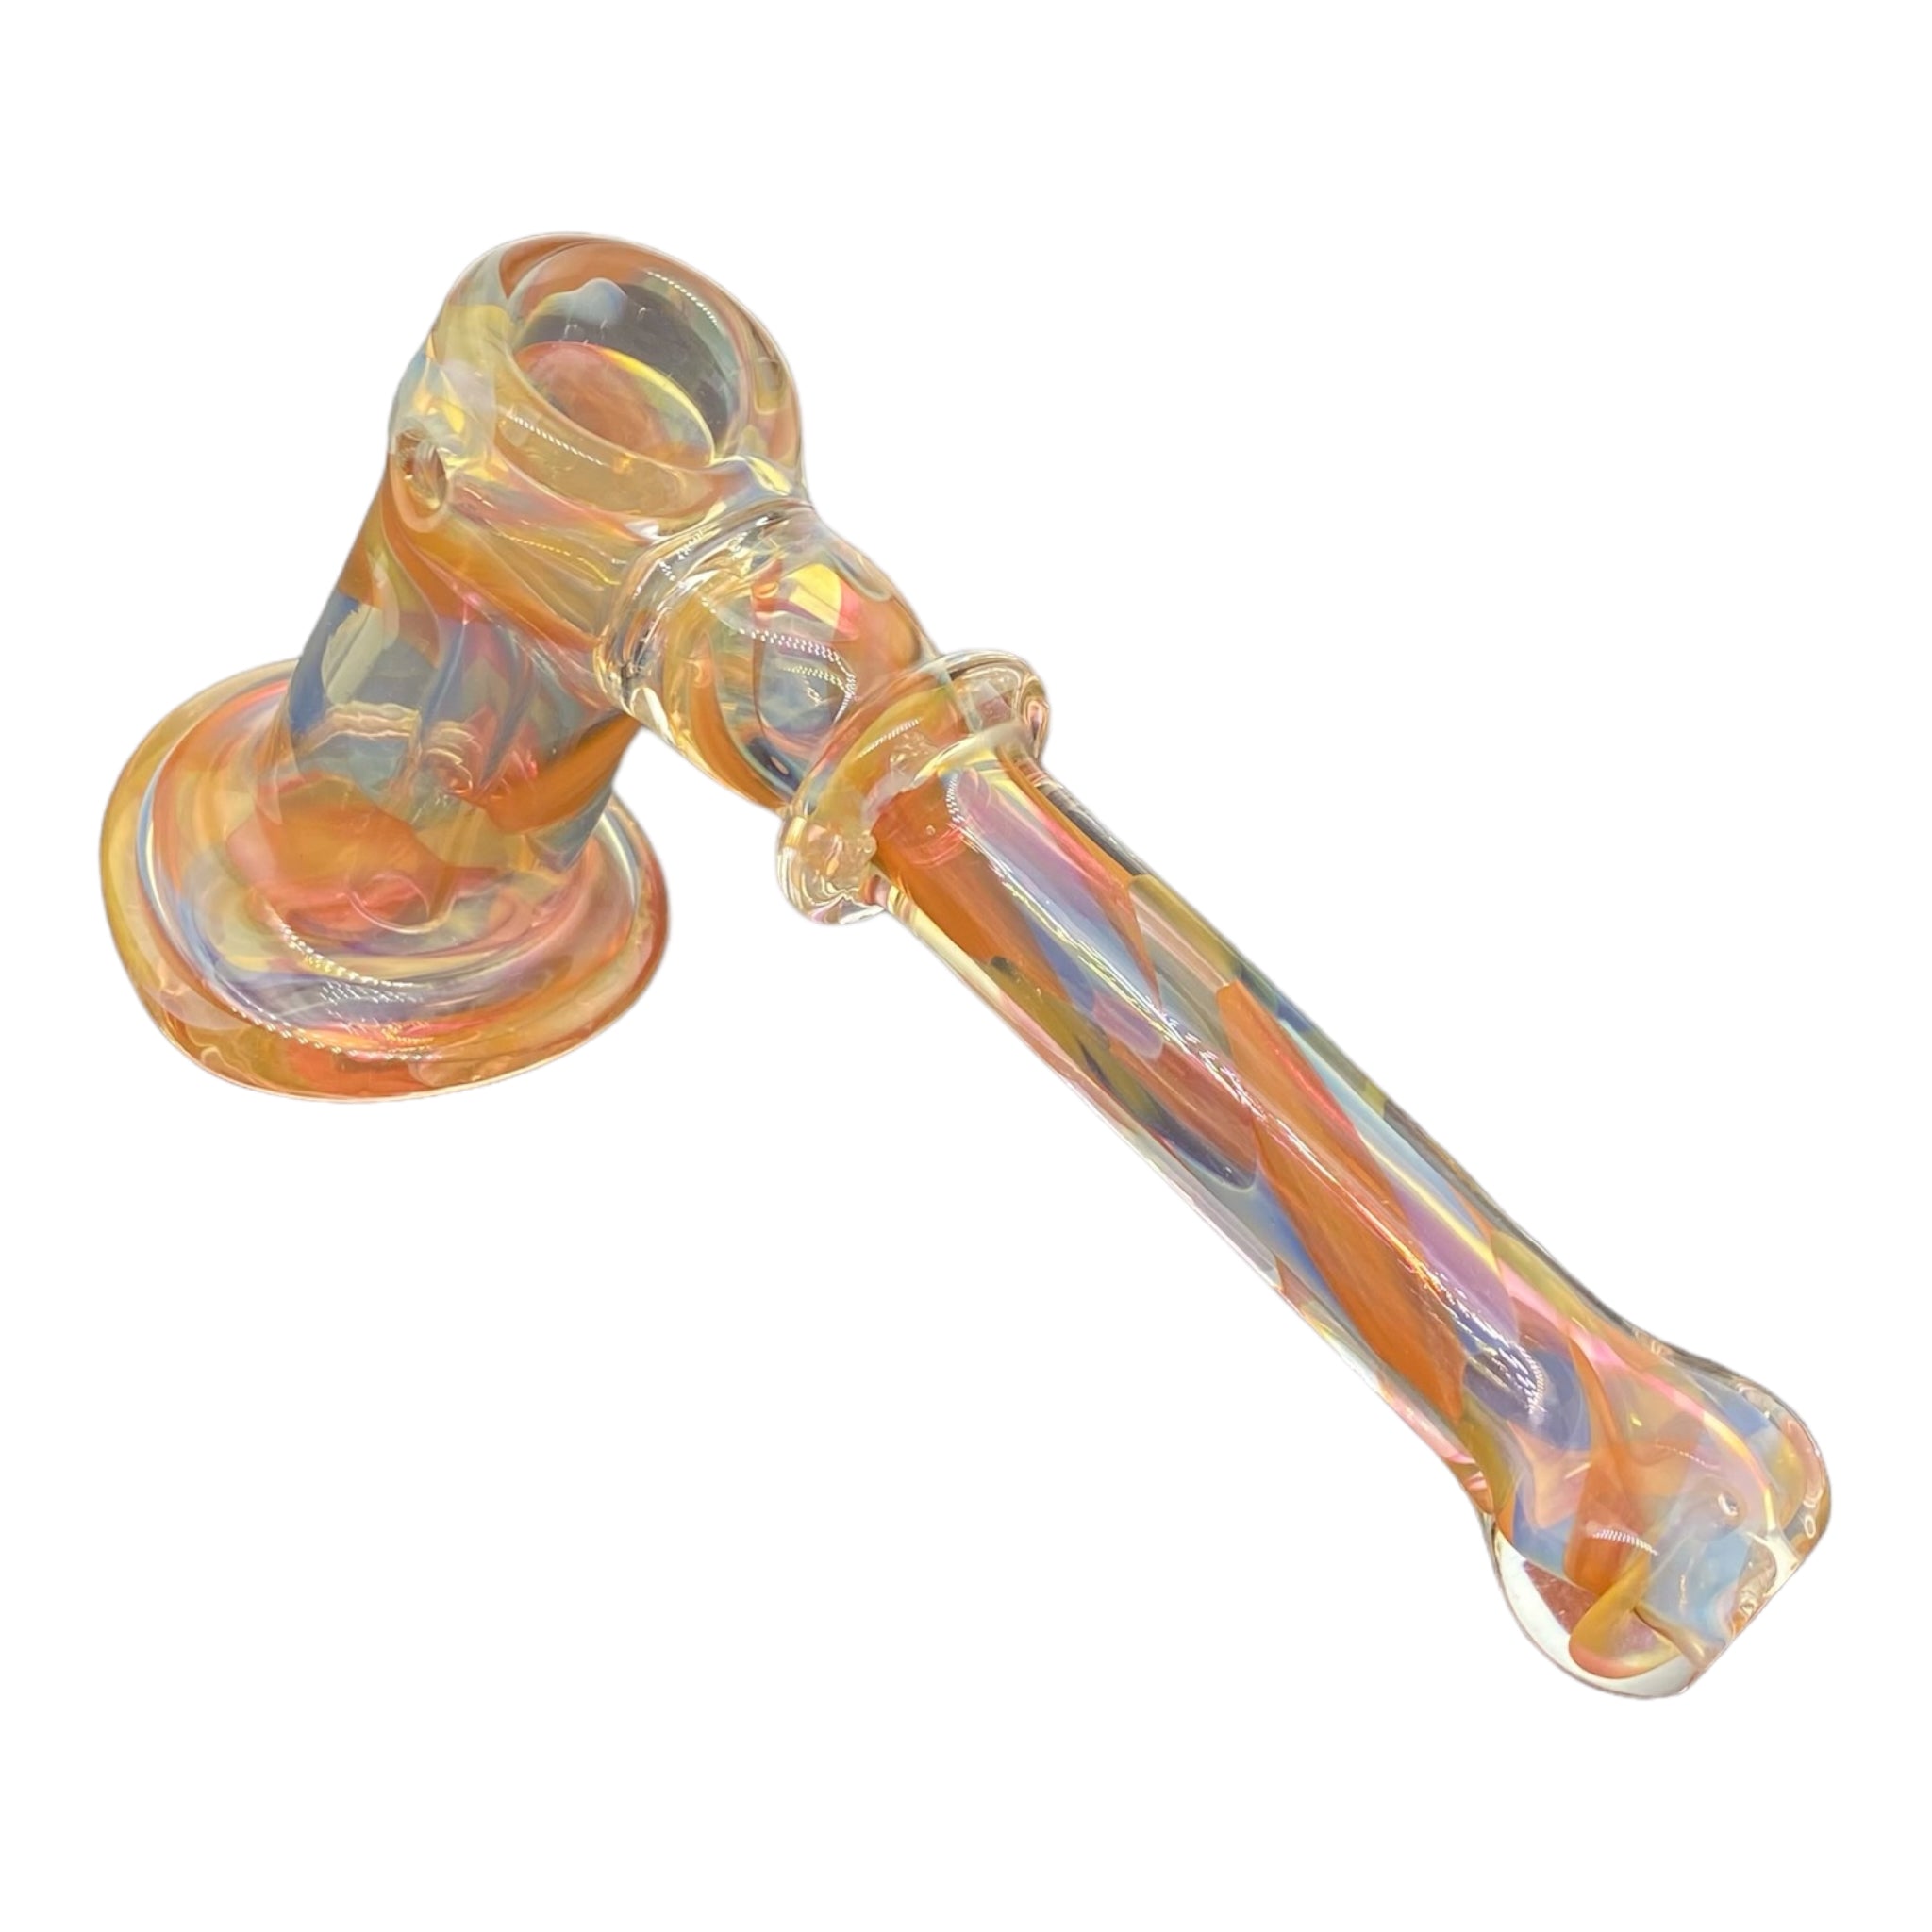 hash hammer smoking pipe with water